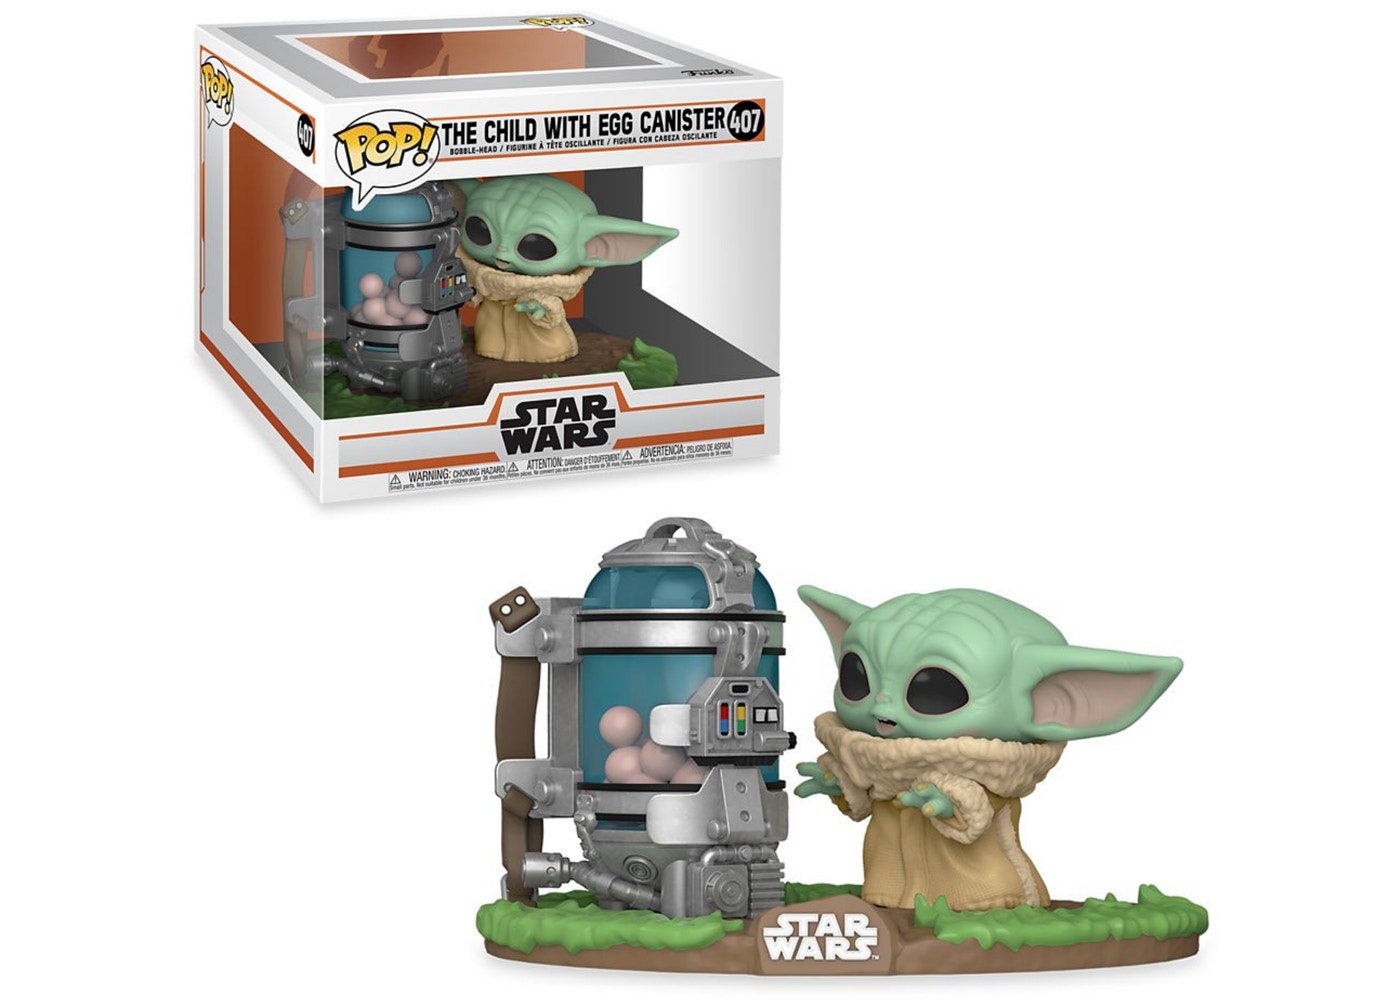 Star Wars the Mandalorian: The Child with Egg Canister Pop! Vinyl Figure (407)